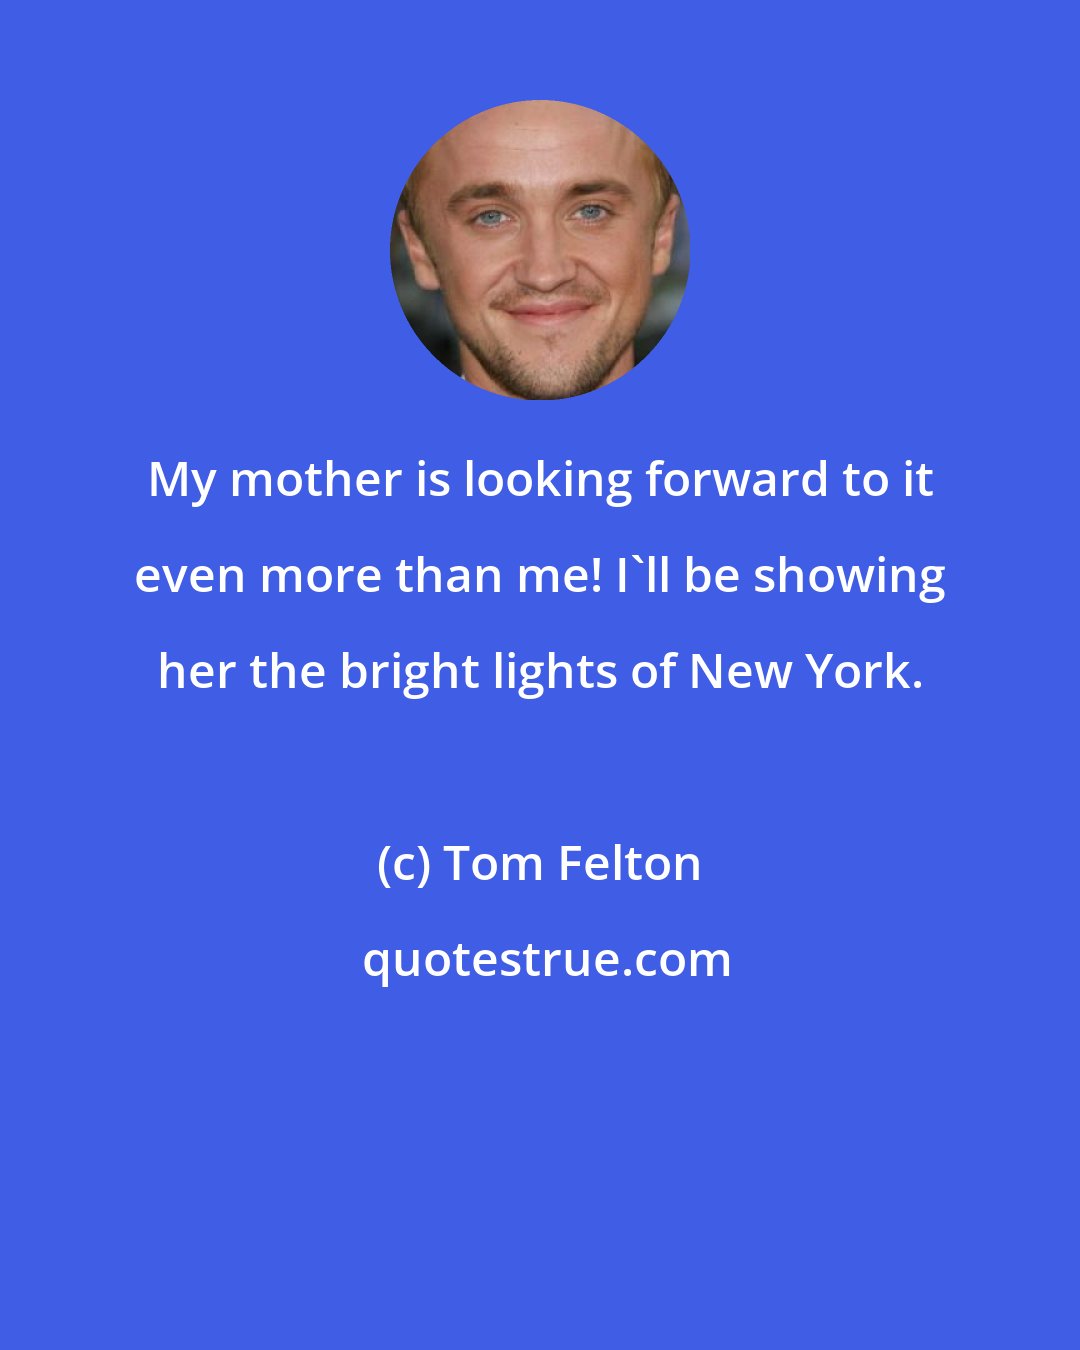 Tom Felton: My mother is looking forward to it even more than me! I'll be showing her the bright lights of New York.